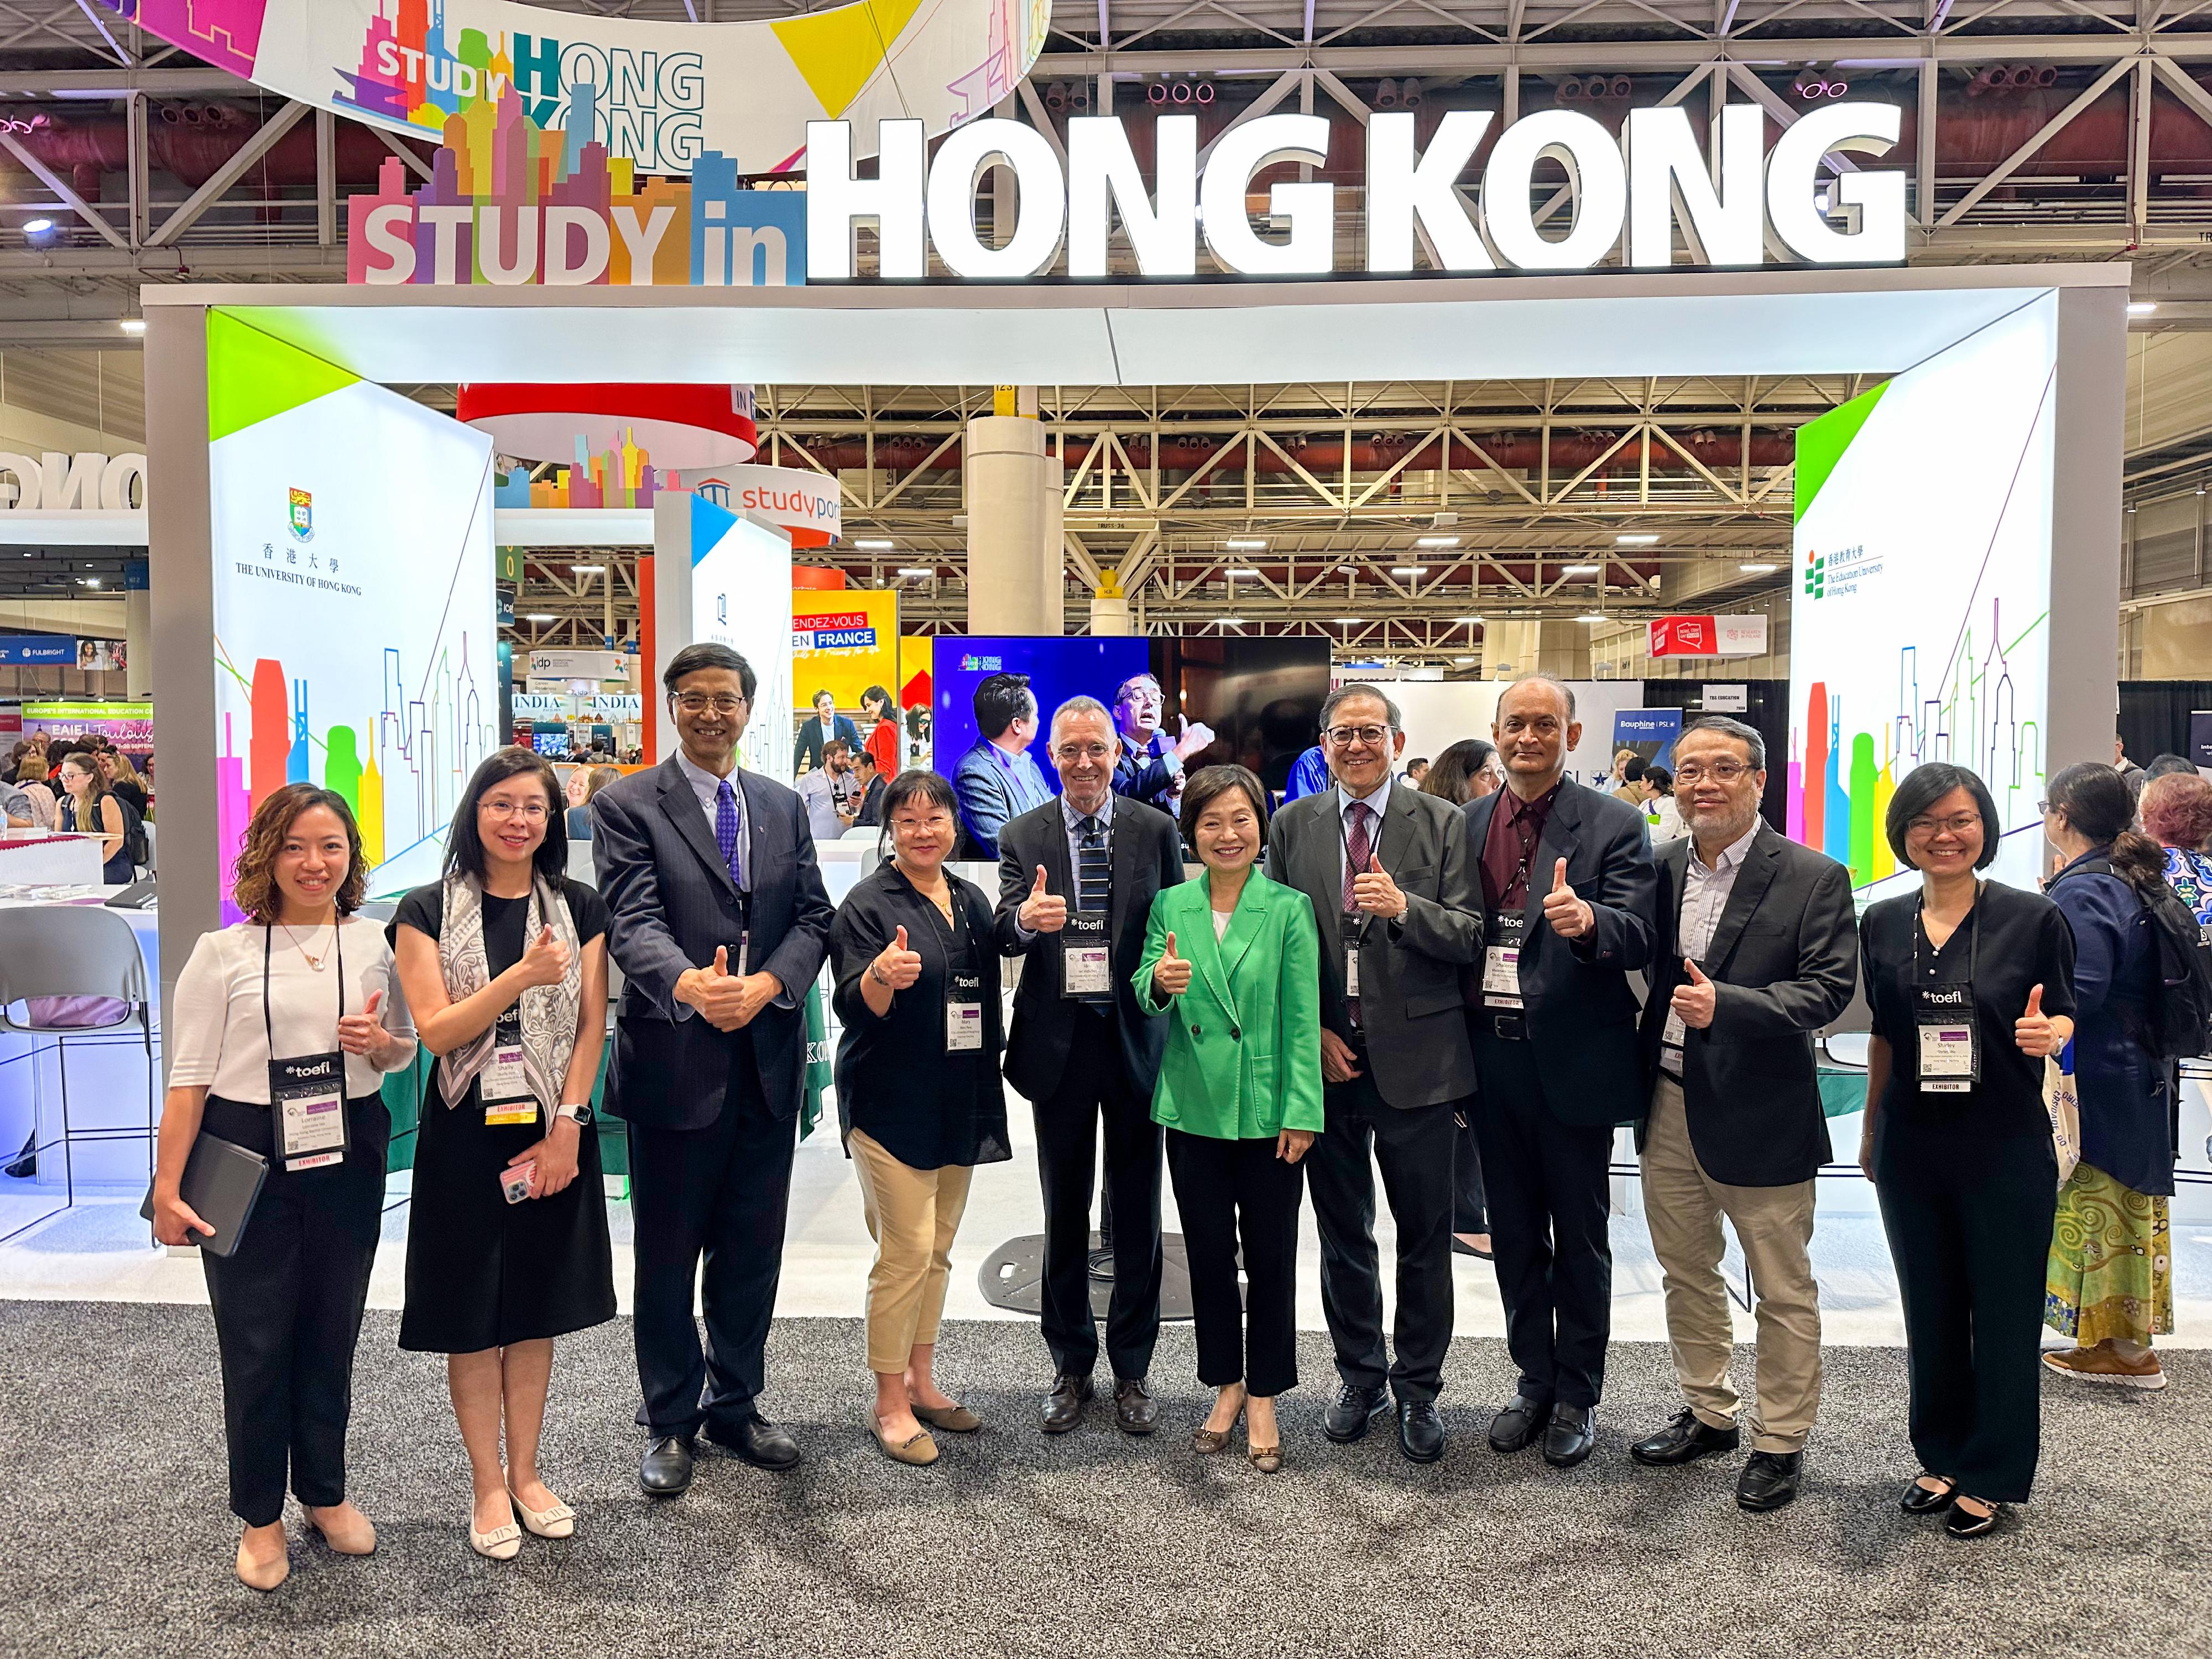 The Secretary for Education, Dr Choi Yuk-lin, visited the Hong Kong Pavilion set up by the Heads of Universities Committee Standing Committee on Internationalisation and funded by the University Grants Committee (UGC) at the NAFSA Annual Conference & Expo in New Orleans, the United States, on May 29 (New Orleans time). Photo shows Dr Choi (fifth right) and the Secretary-General of the UGC, Professor James Tang (fourth right), with participating university representatives.